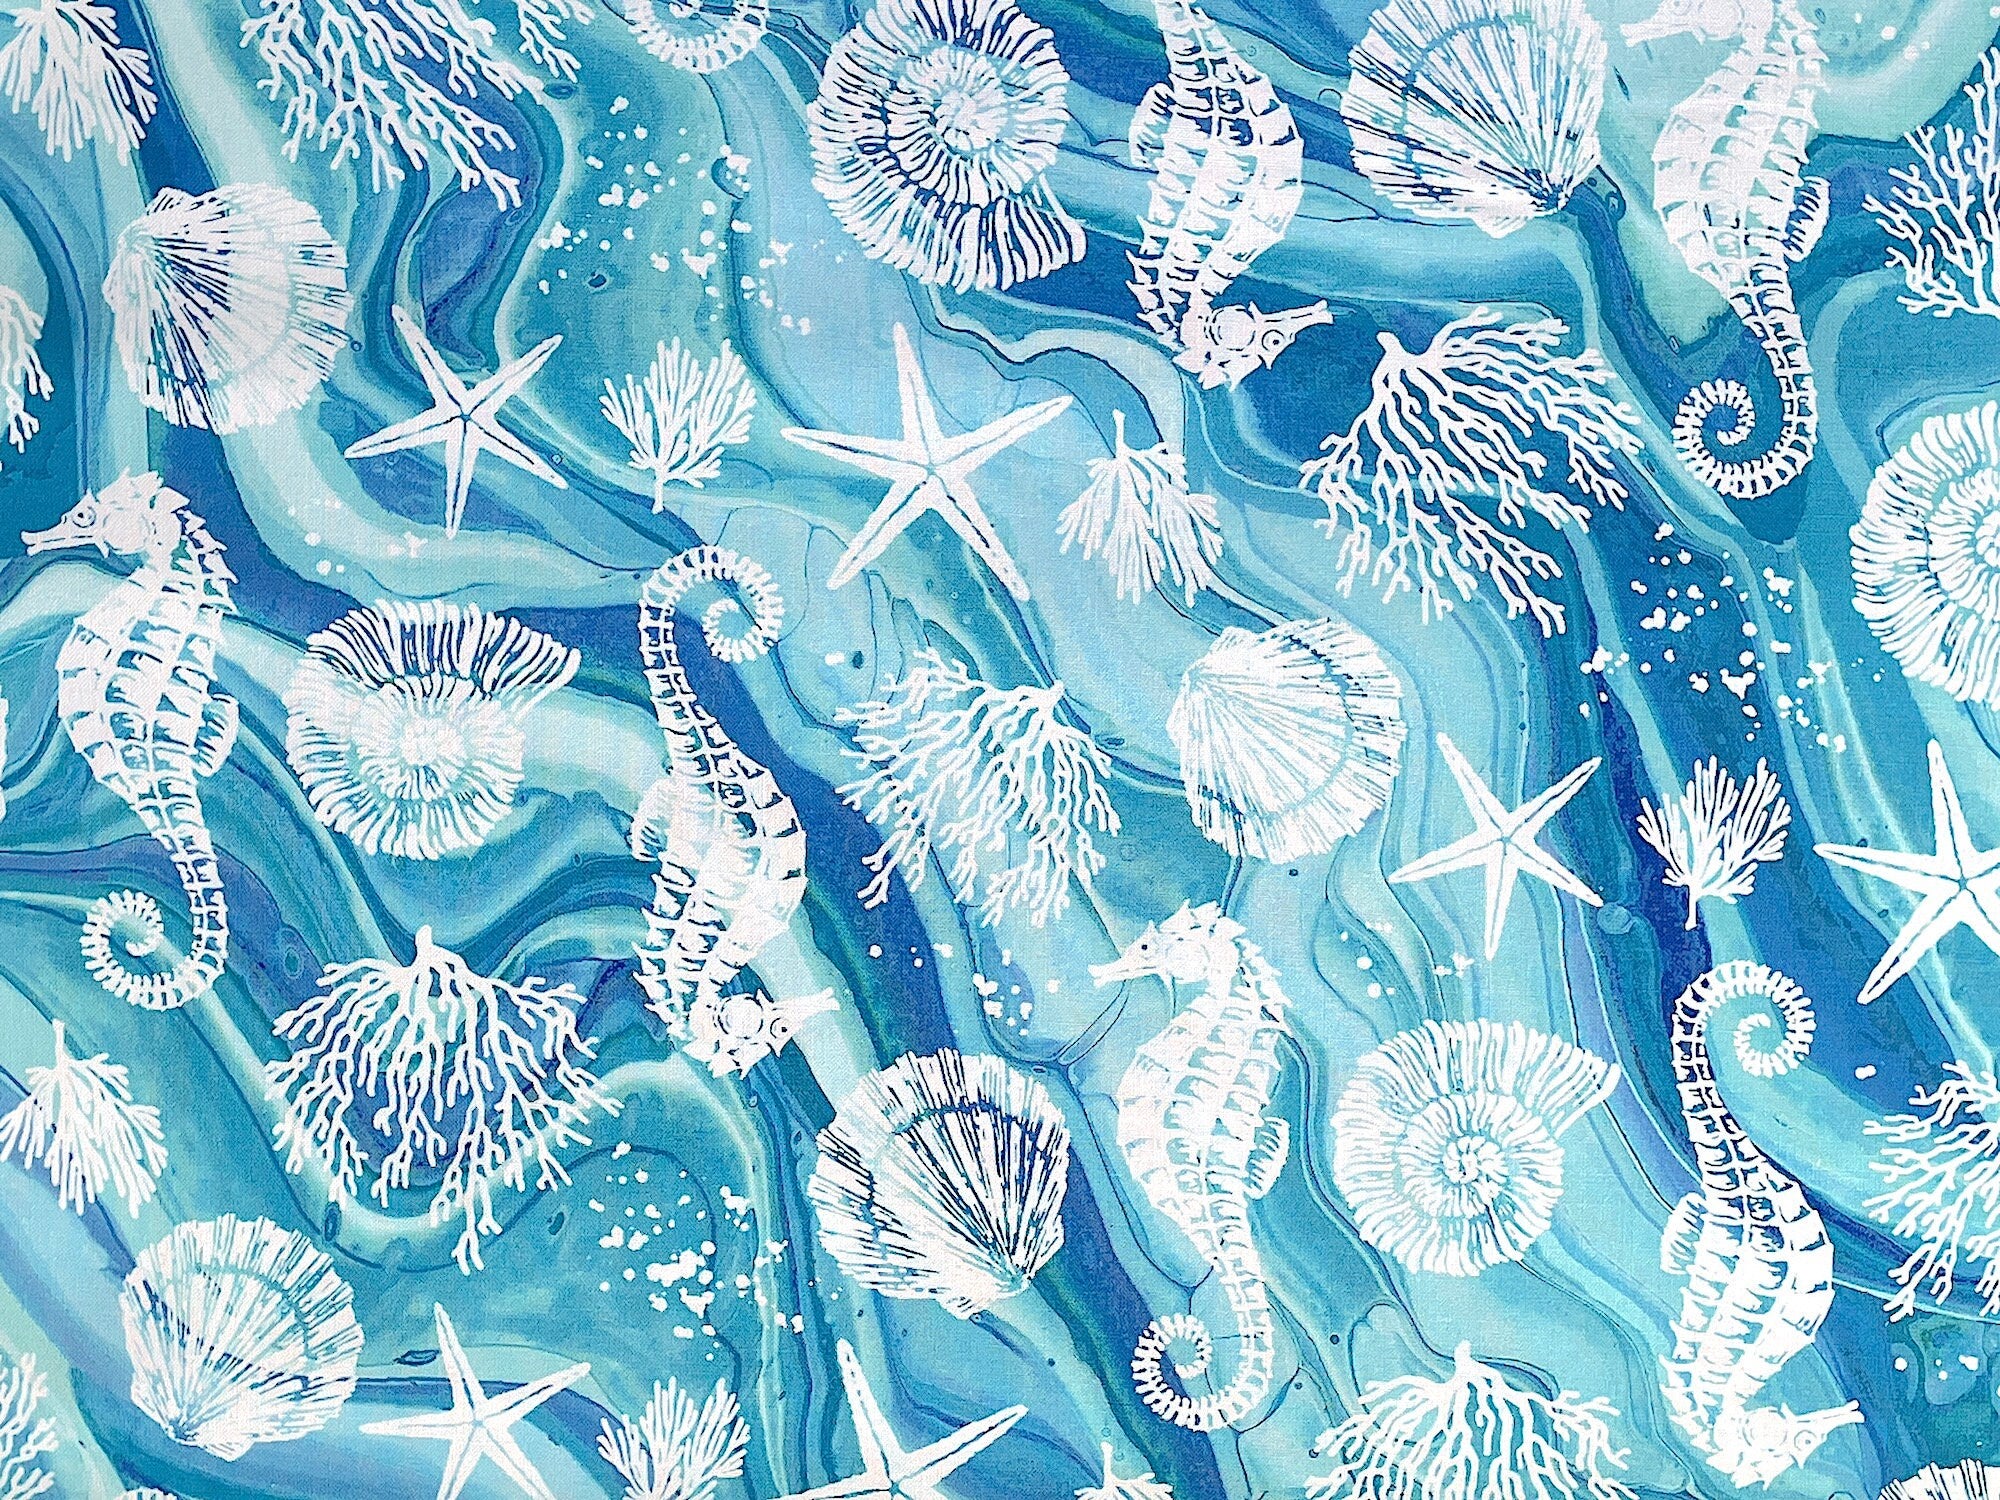 Blue cotton fabric covered with white starfish, coral and sea horses.